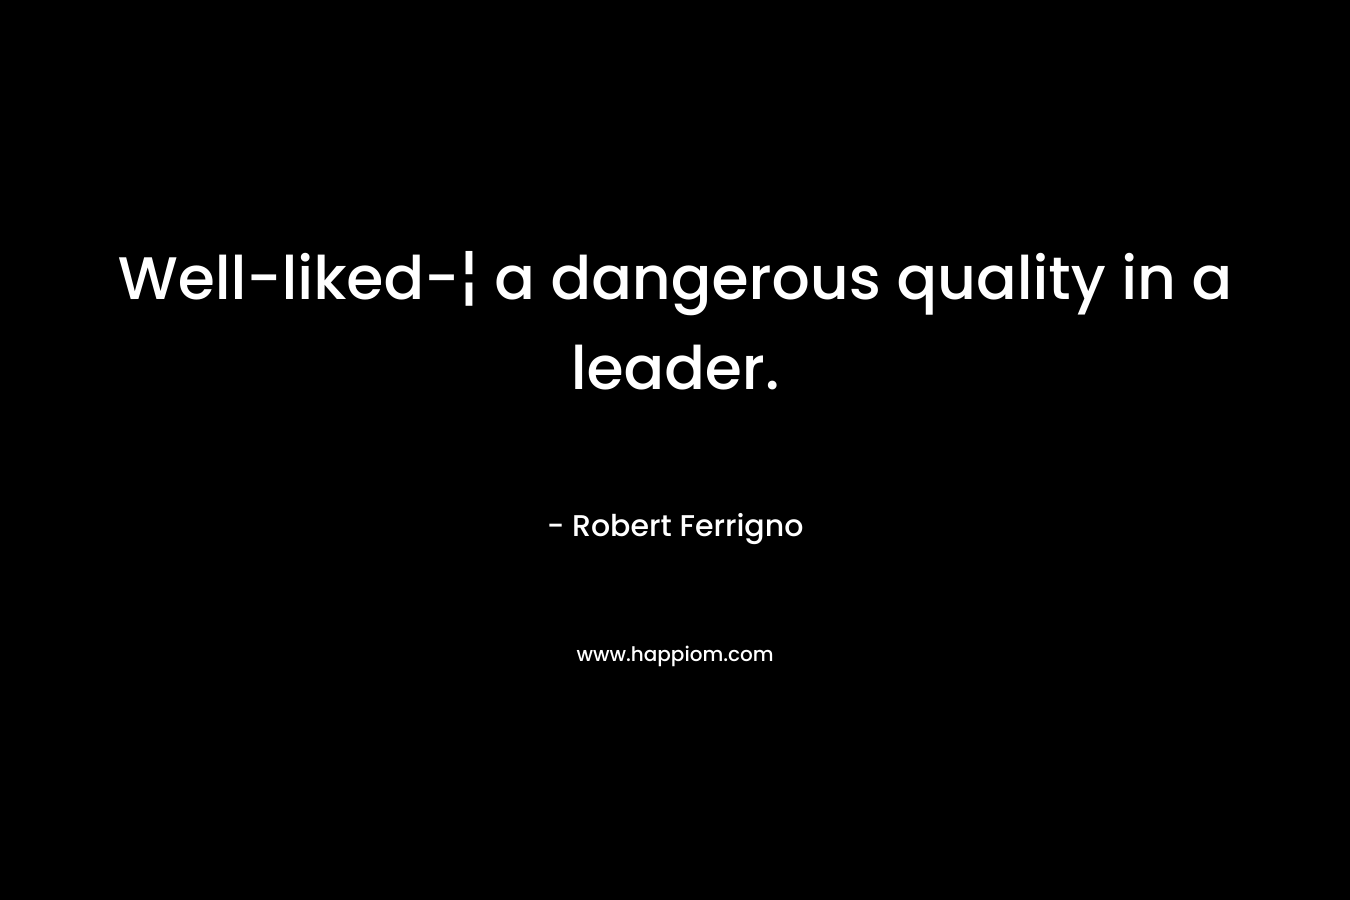 Well-liked-¦ a dangerous quality in a leader. – Robert Ferrigno